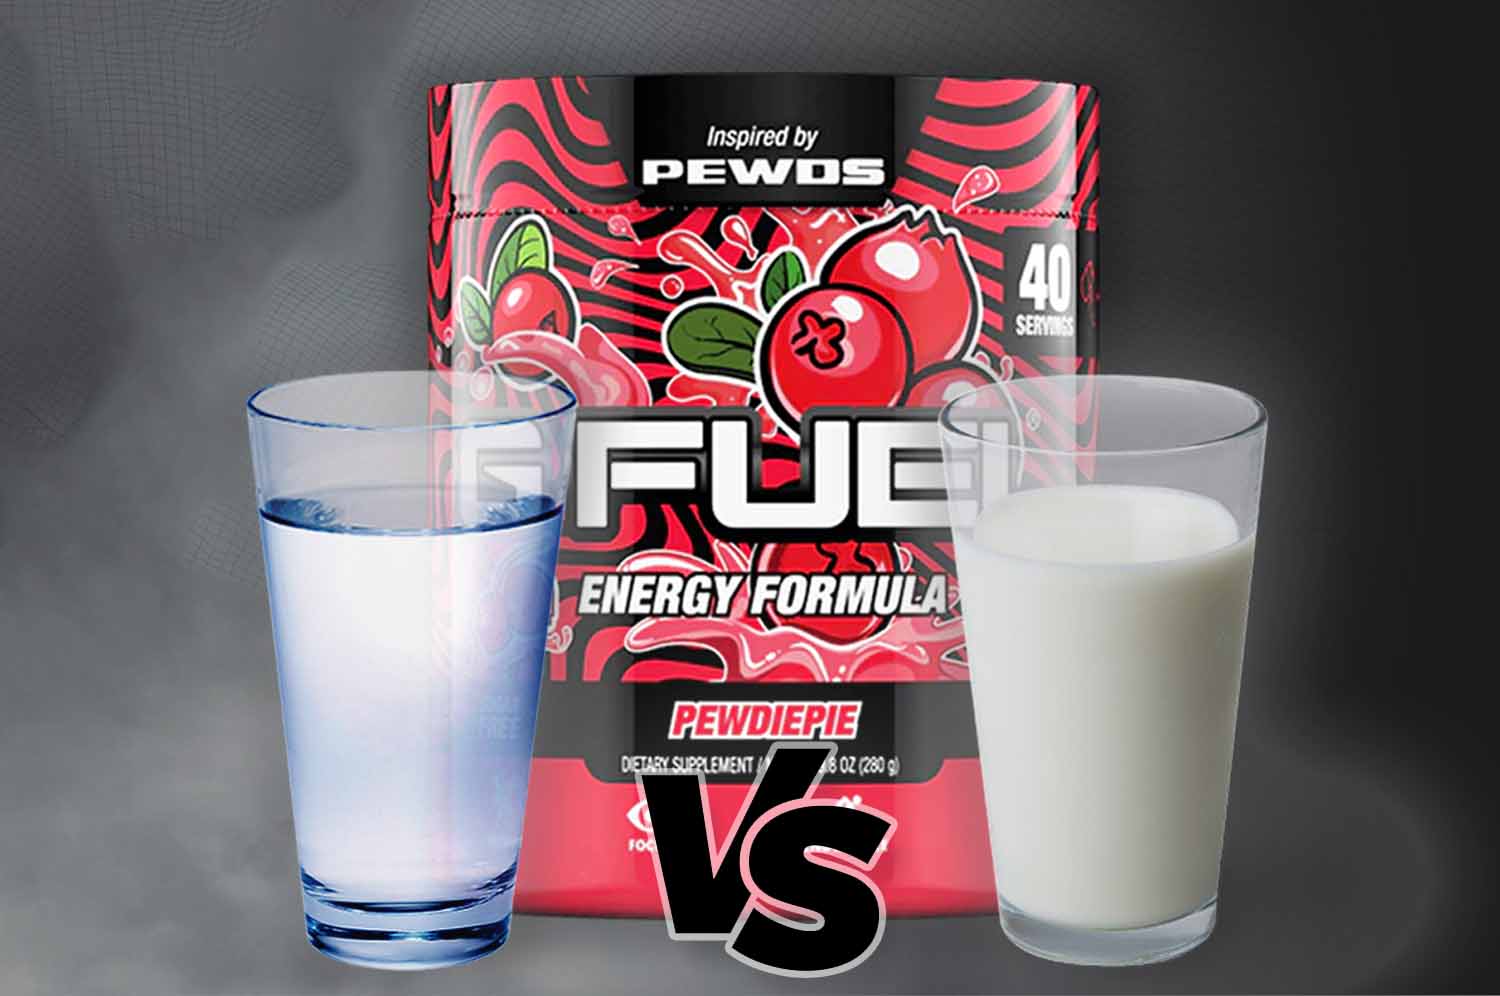 Tub of pewdiepie g fuel in the center with a glass of milk on the right and a glass of water on the left